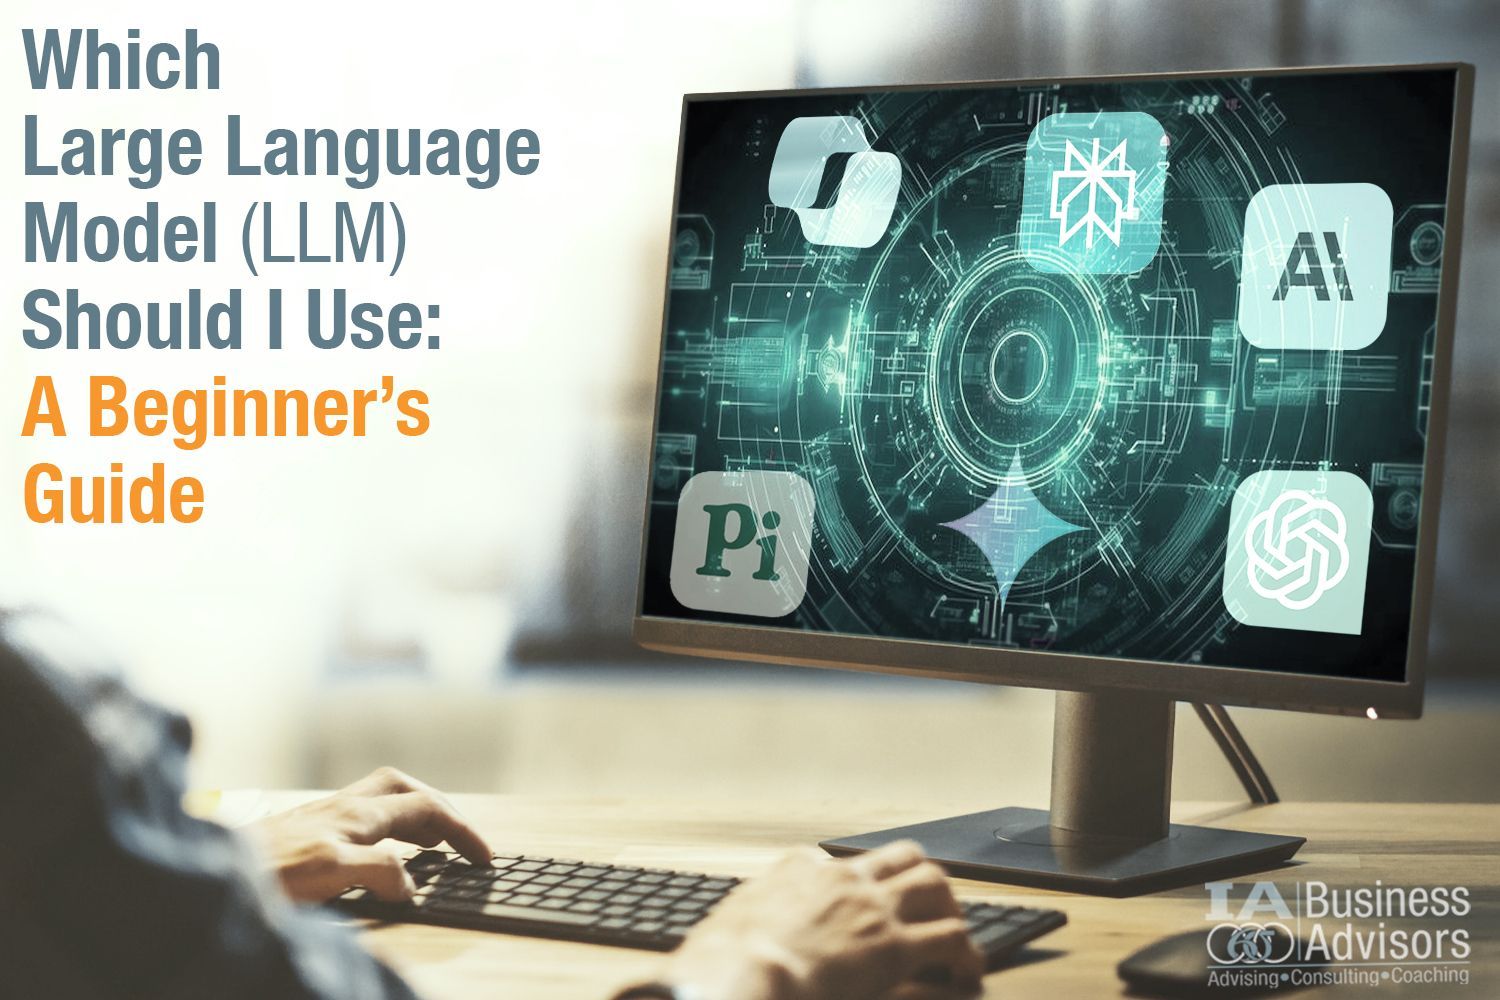 Choosing the Right Large Language Model (LLM) for Your Business: A Strategic Guide